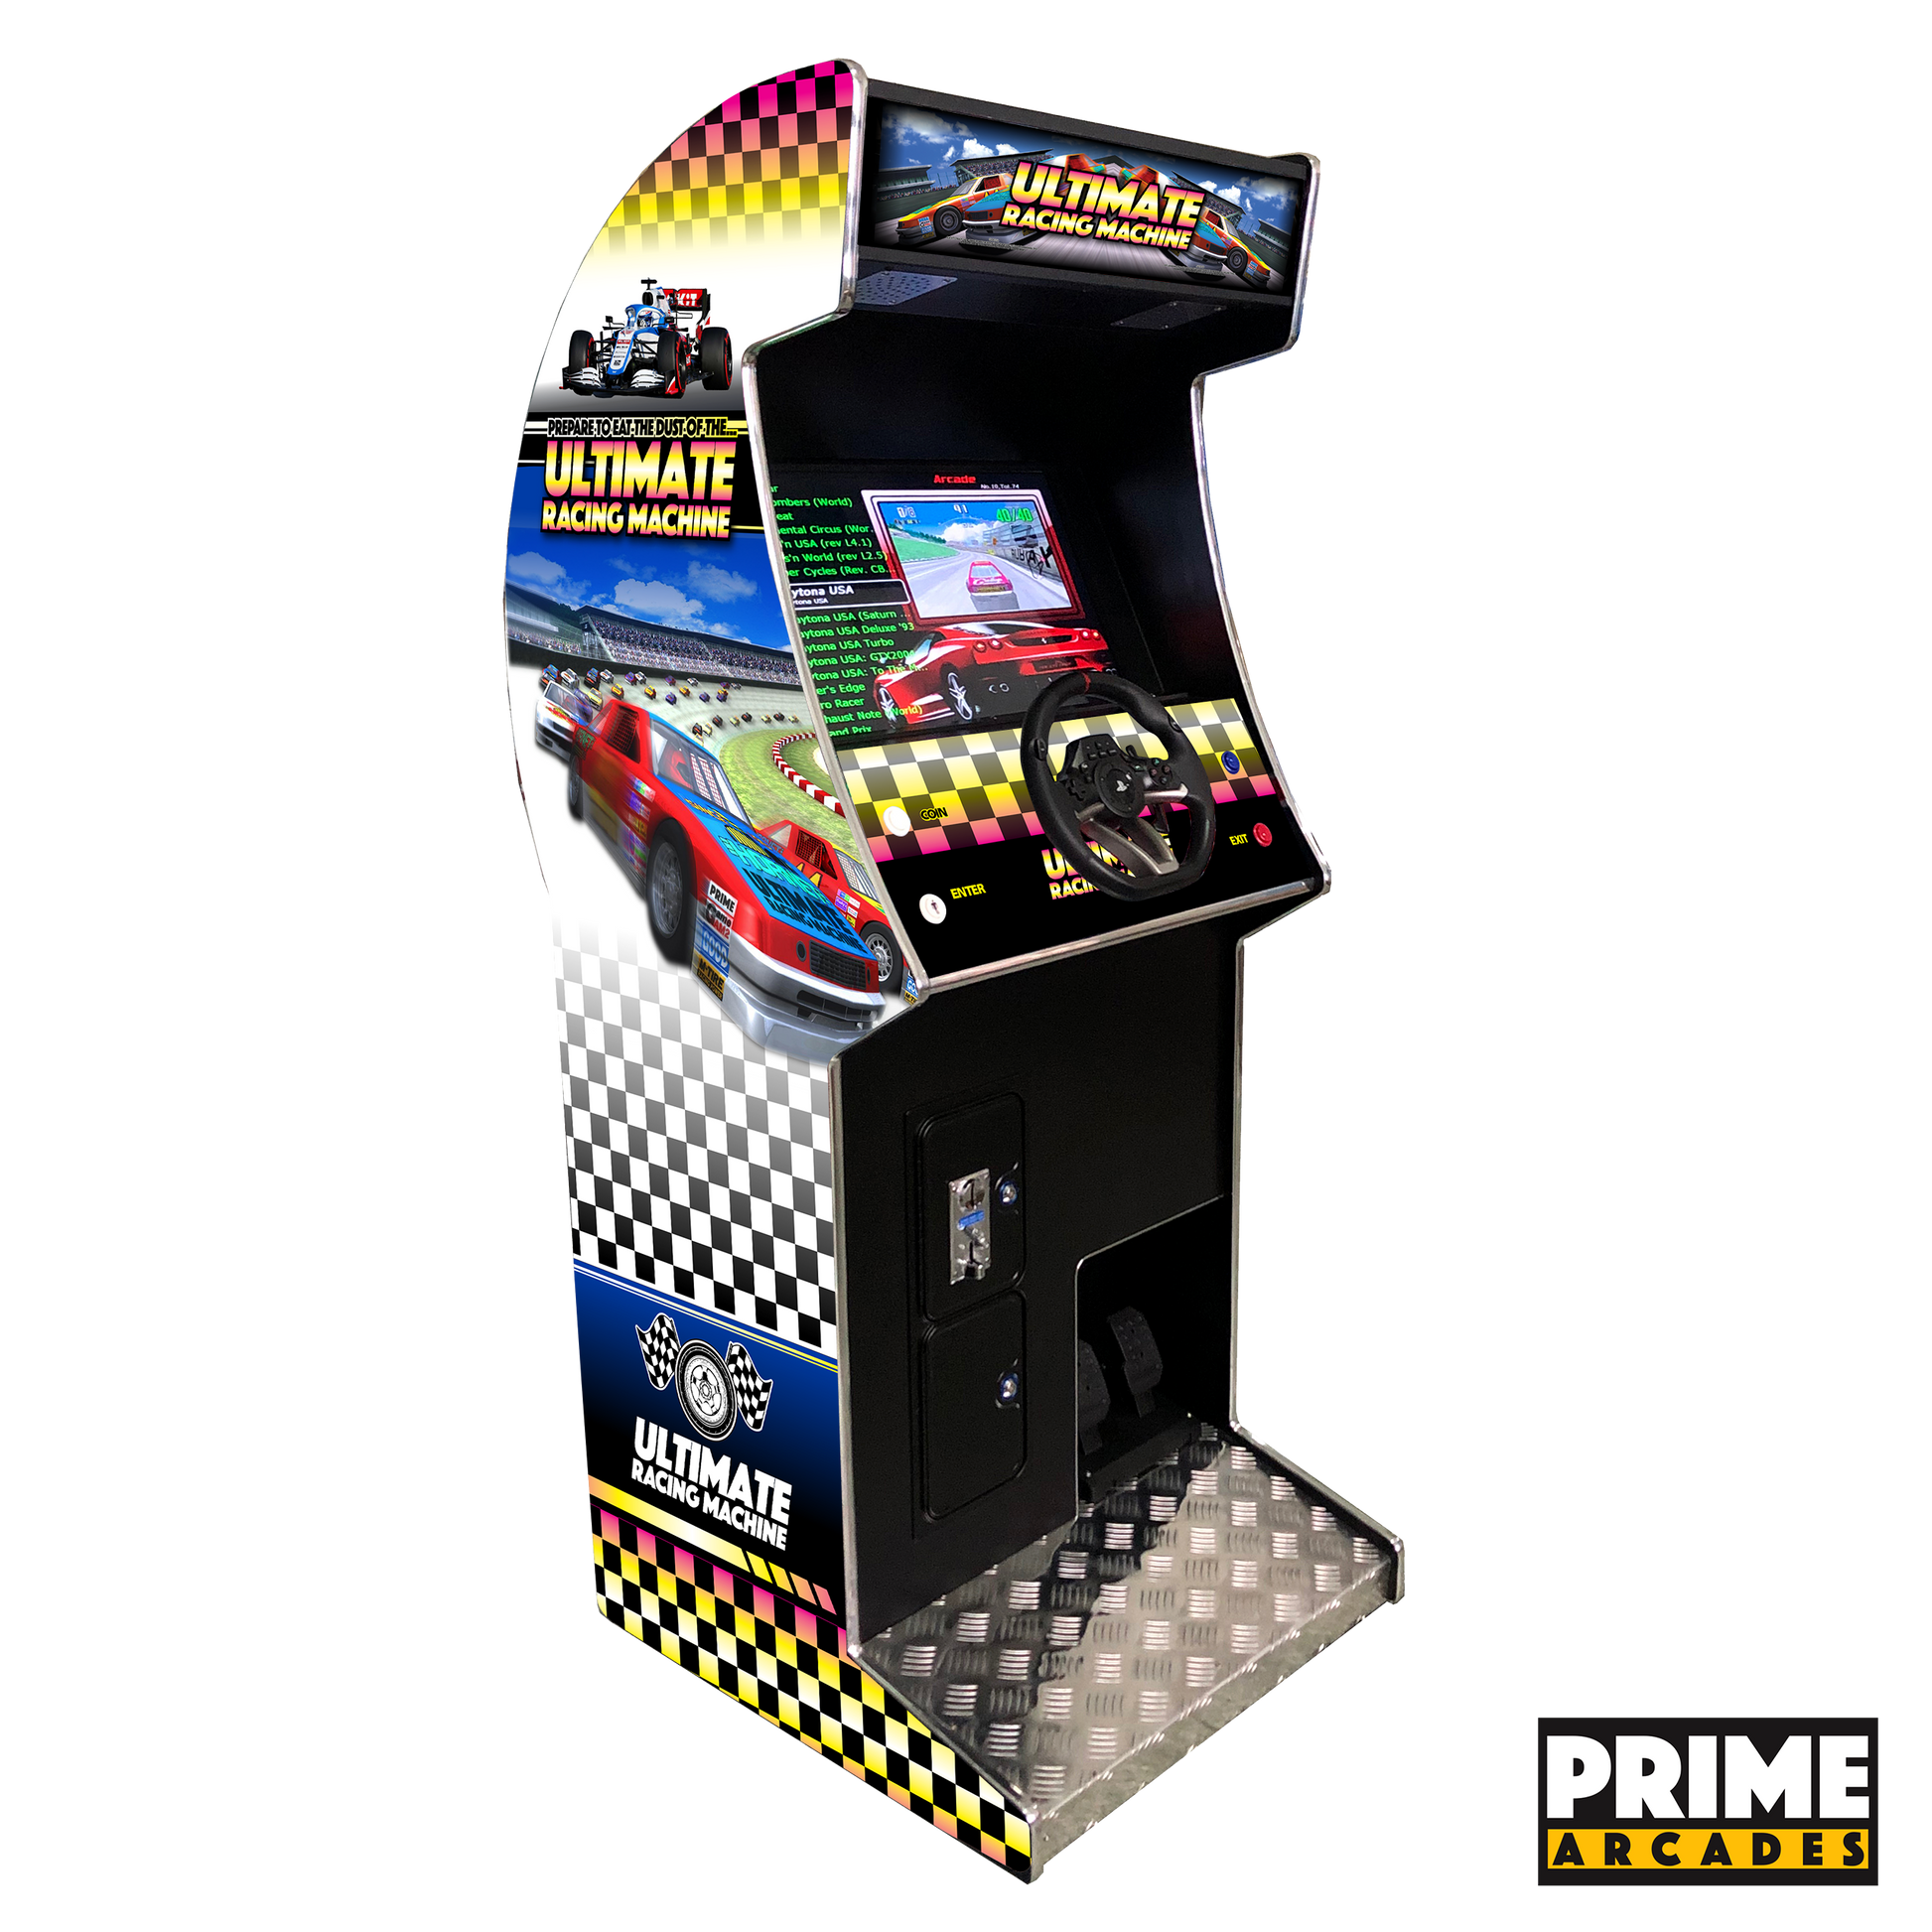 135 Racing Games in 1 Stand Up - Prime Arcades Inc